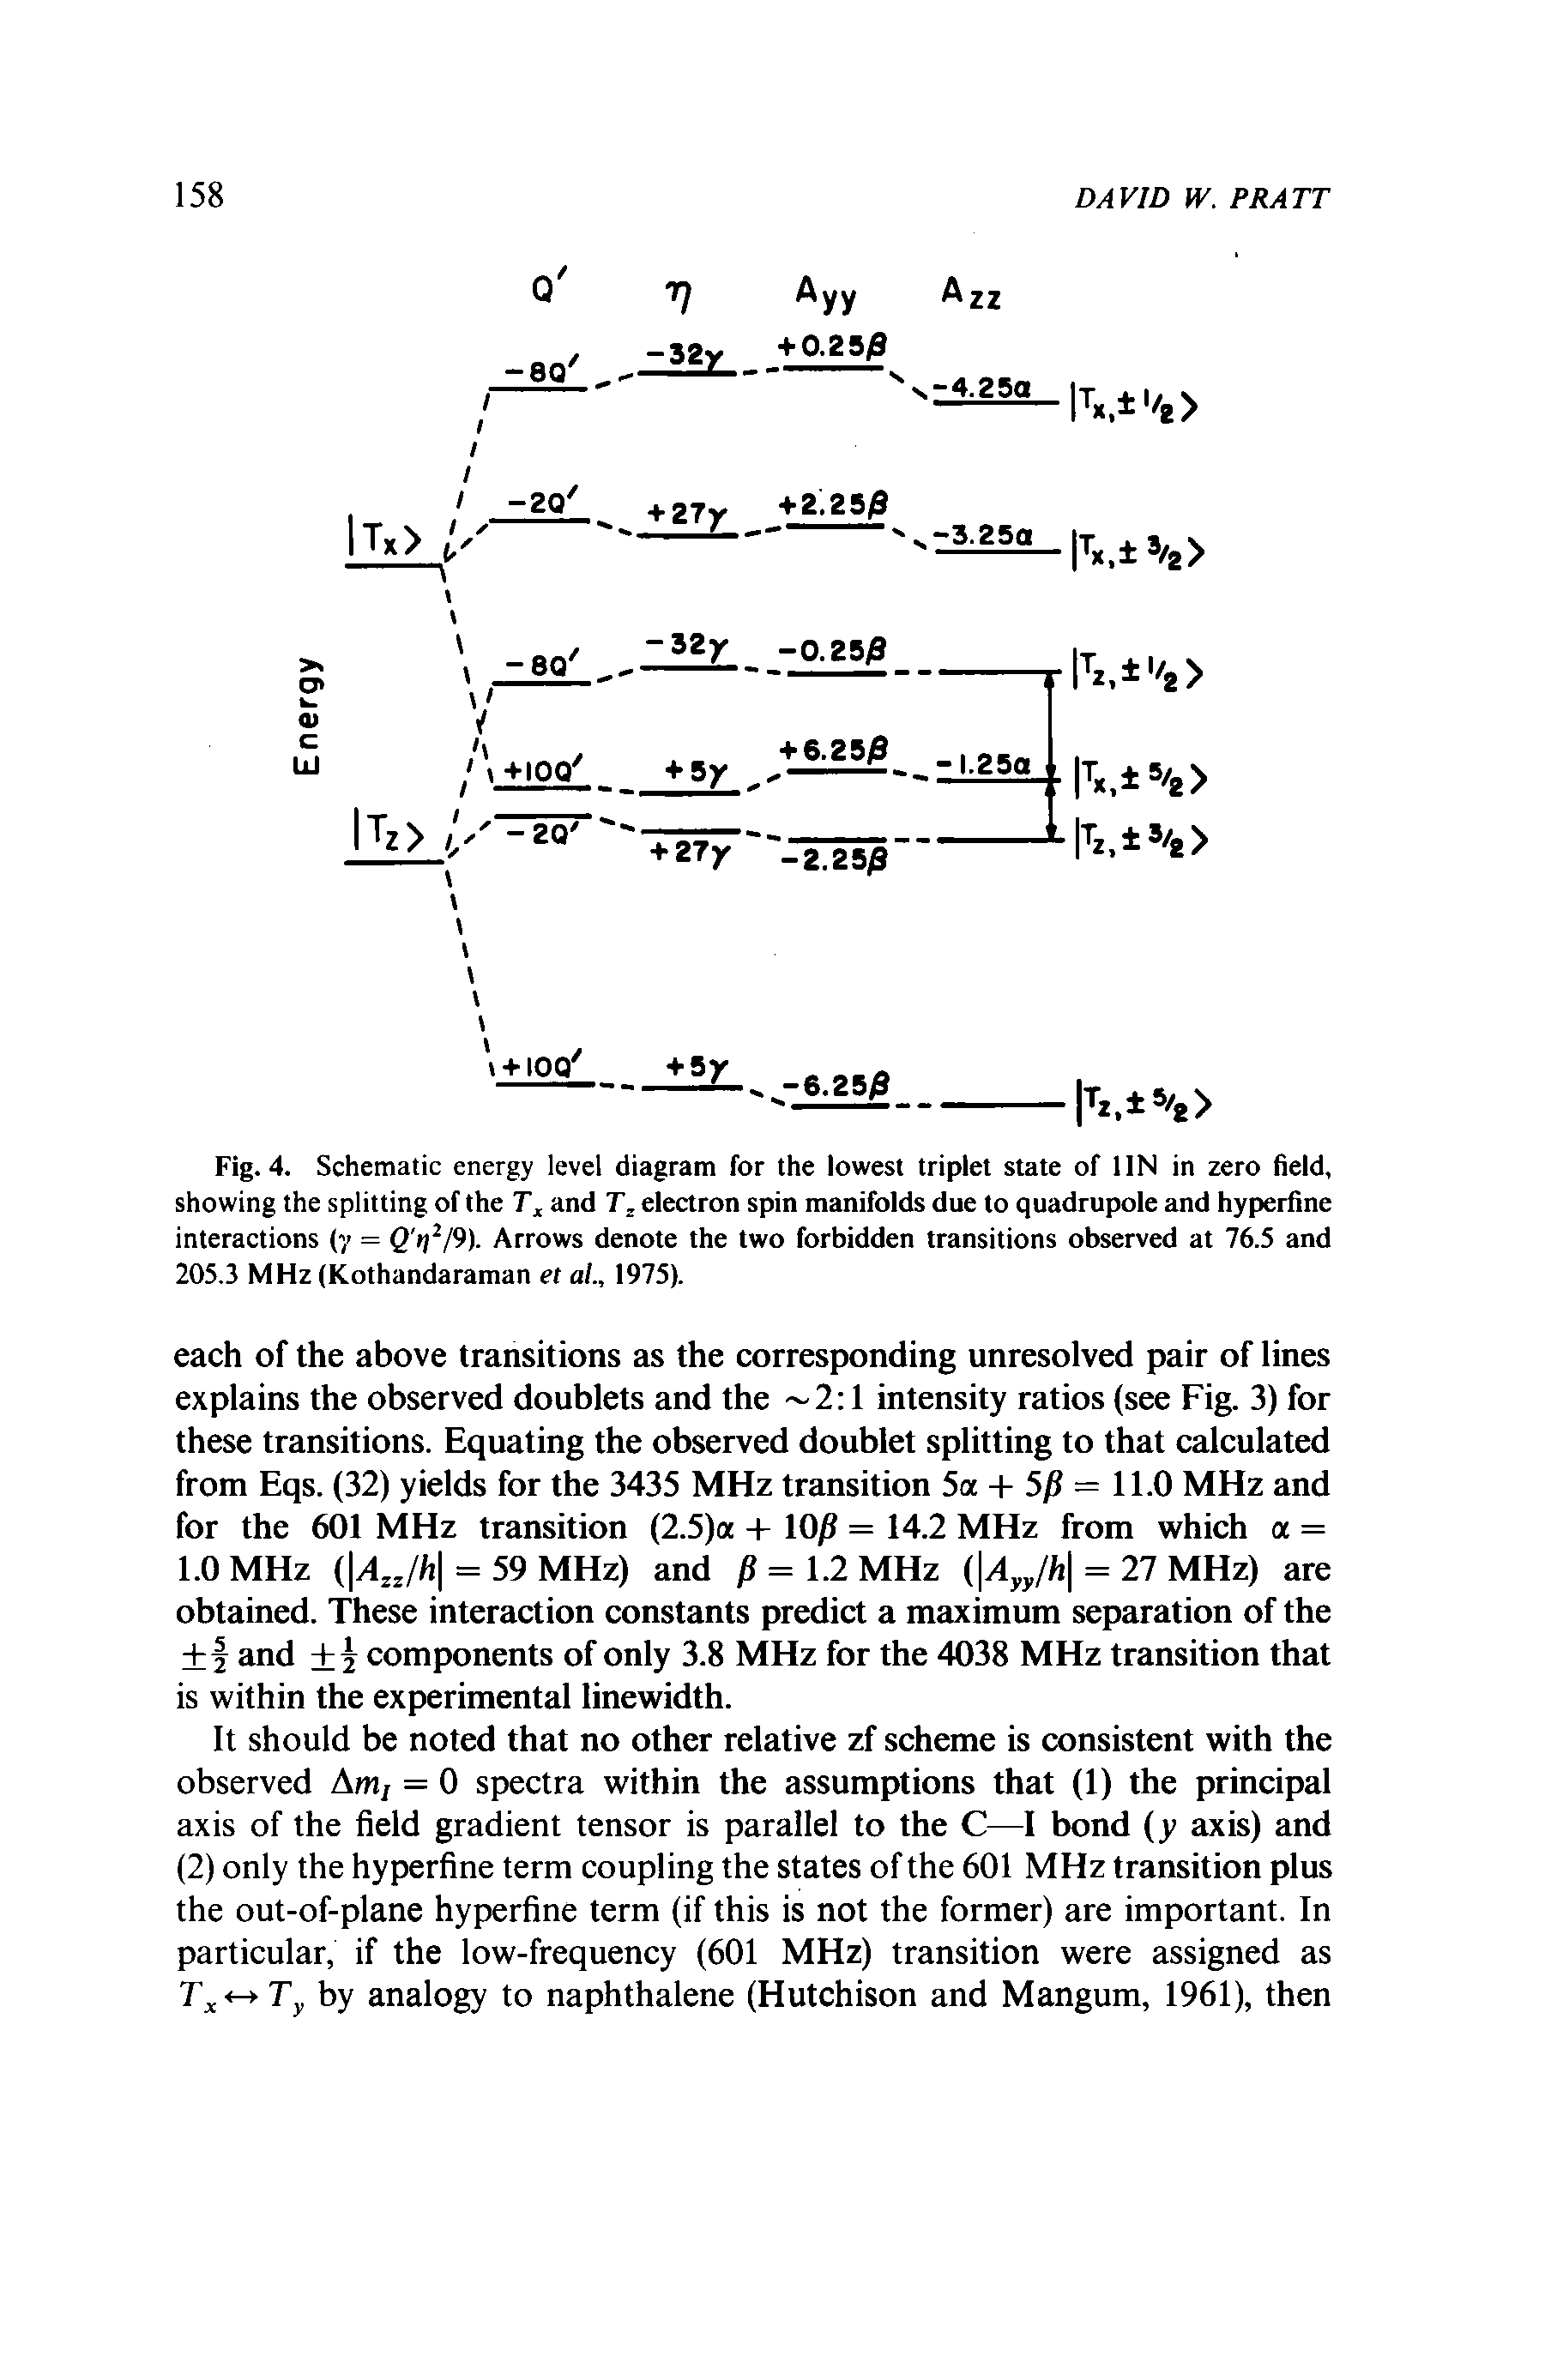 Fig. 4. Schematic energy level diagram for the lowest triplet state of I IN in zero held, showing the splitting of the and T. electron spin manifolds due to quadrupole and hyperfine interactions (y = 0 i) /9). Arrows denote the two forbidden transitions observed at 76.5 and 205.3 MHz (Kothandaraman et al., 1975).